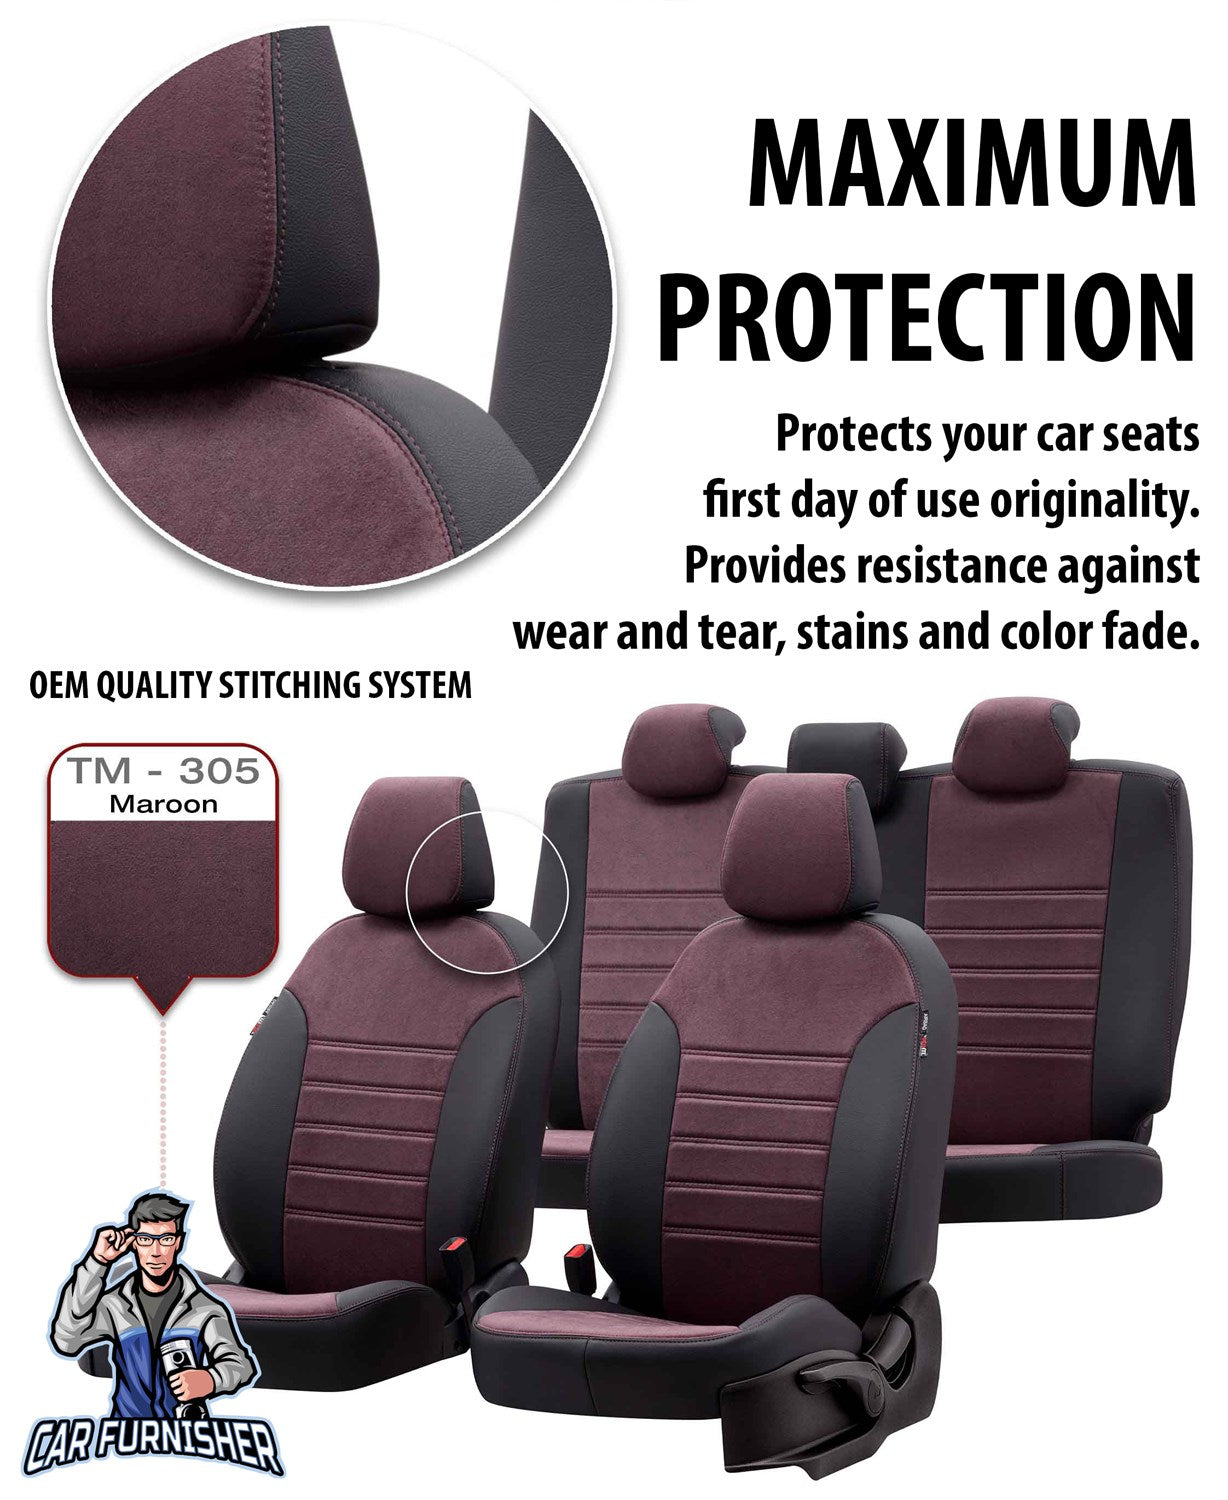 Seat Cordoba Seat Covers Milano Suede Design Burgundy Leather & Suede Fabric